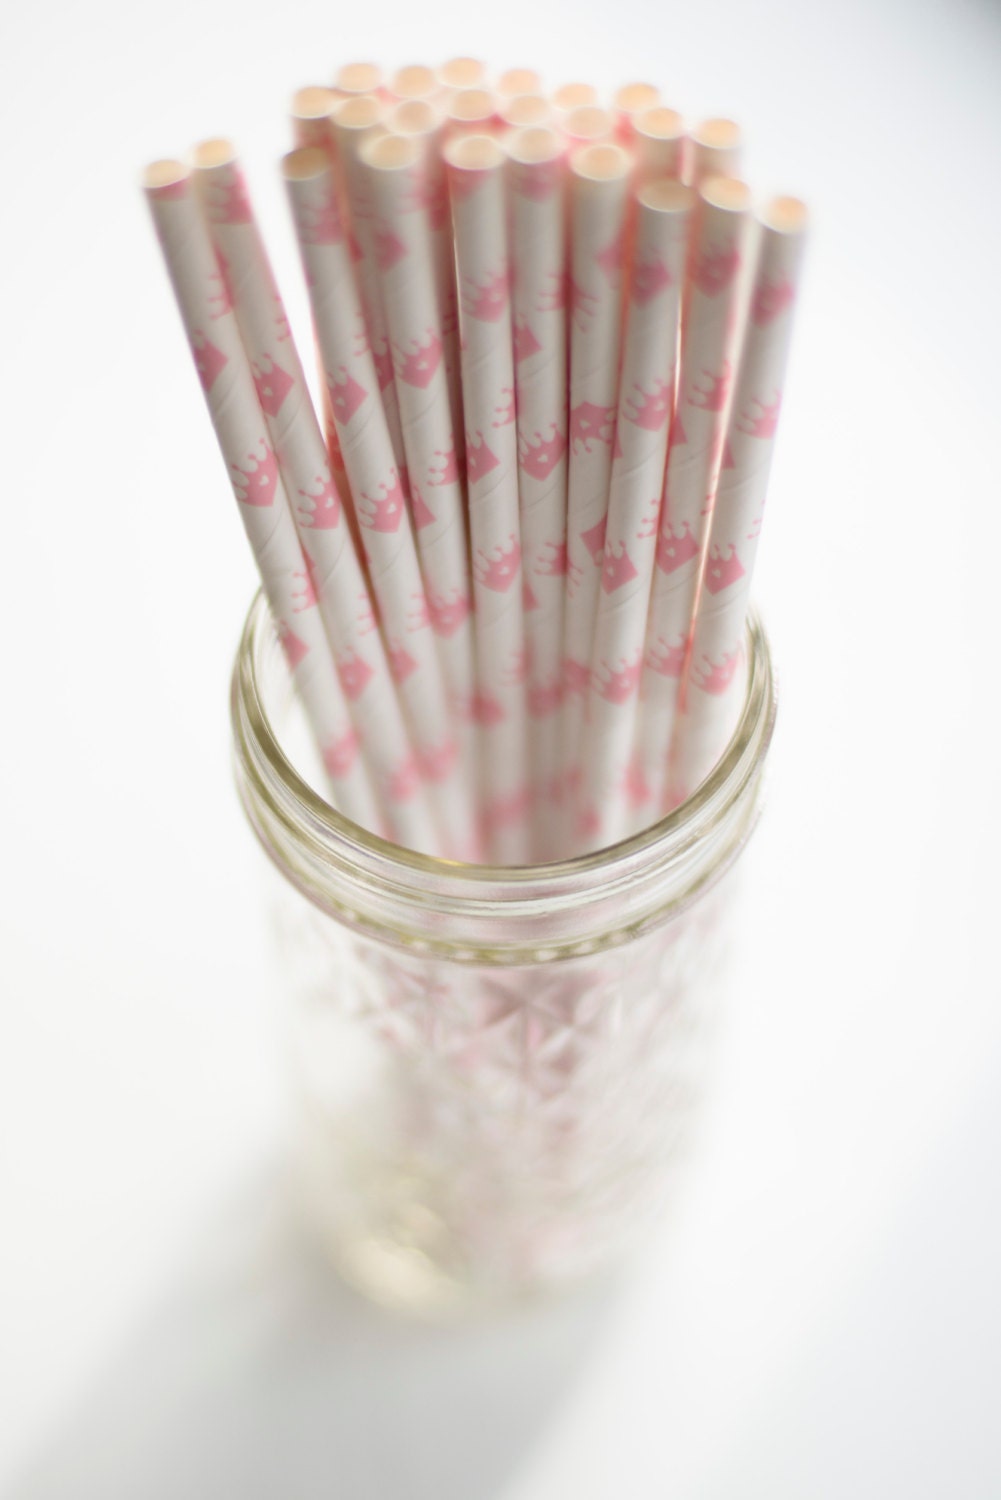 PINK CROWNS Paper Straws, 24 Pink Crown Paper Straws, Princess Party, Baby Shower, Girl Parties, Birthday